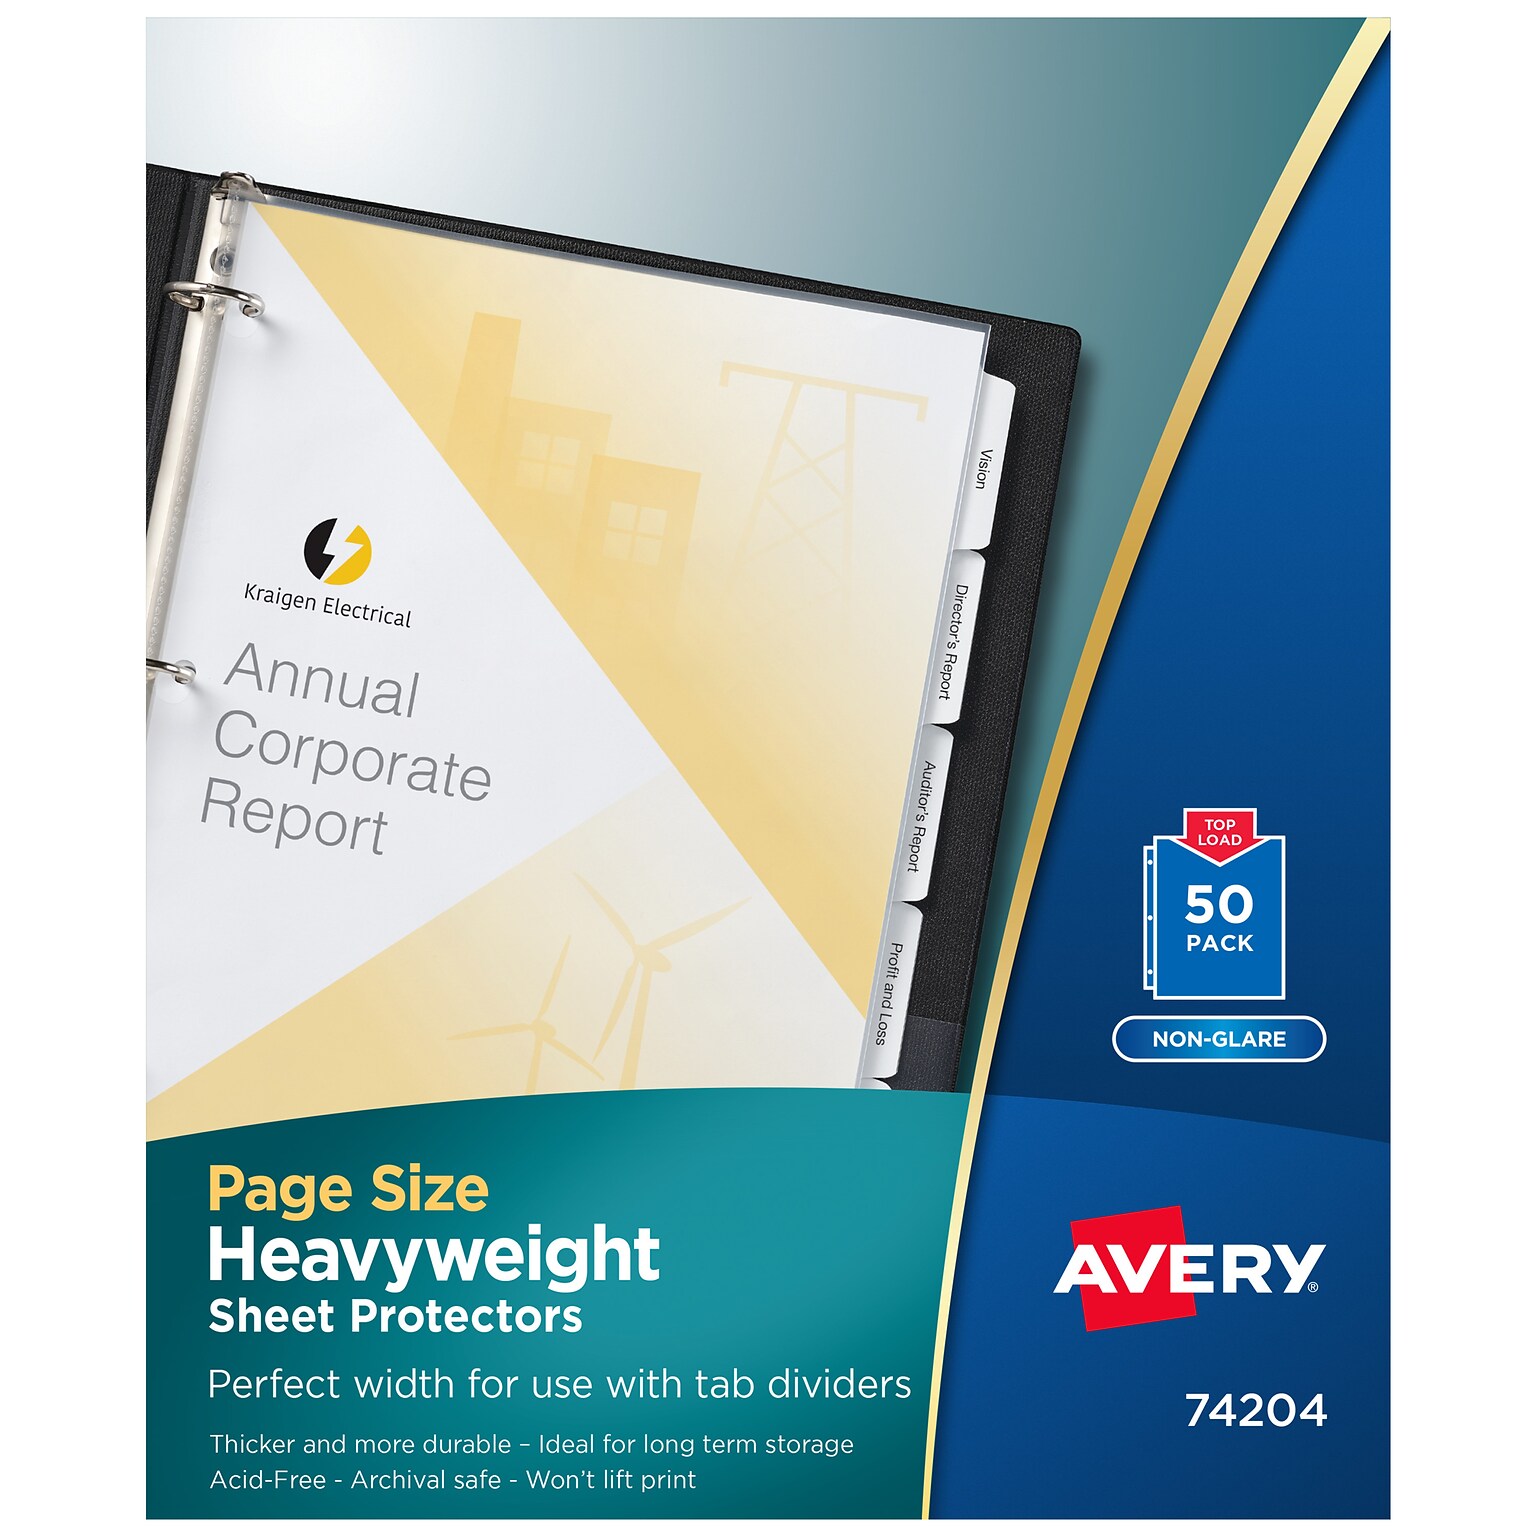 Avery Page Size Heavyweight Non-Glare Sheet Protectors, 8.5 x 11, Clear, 50/Box (74204)